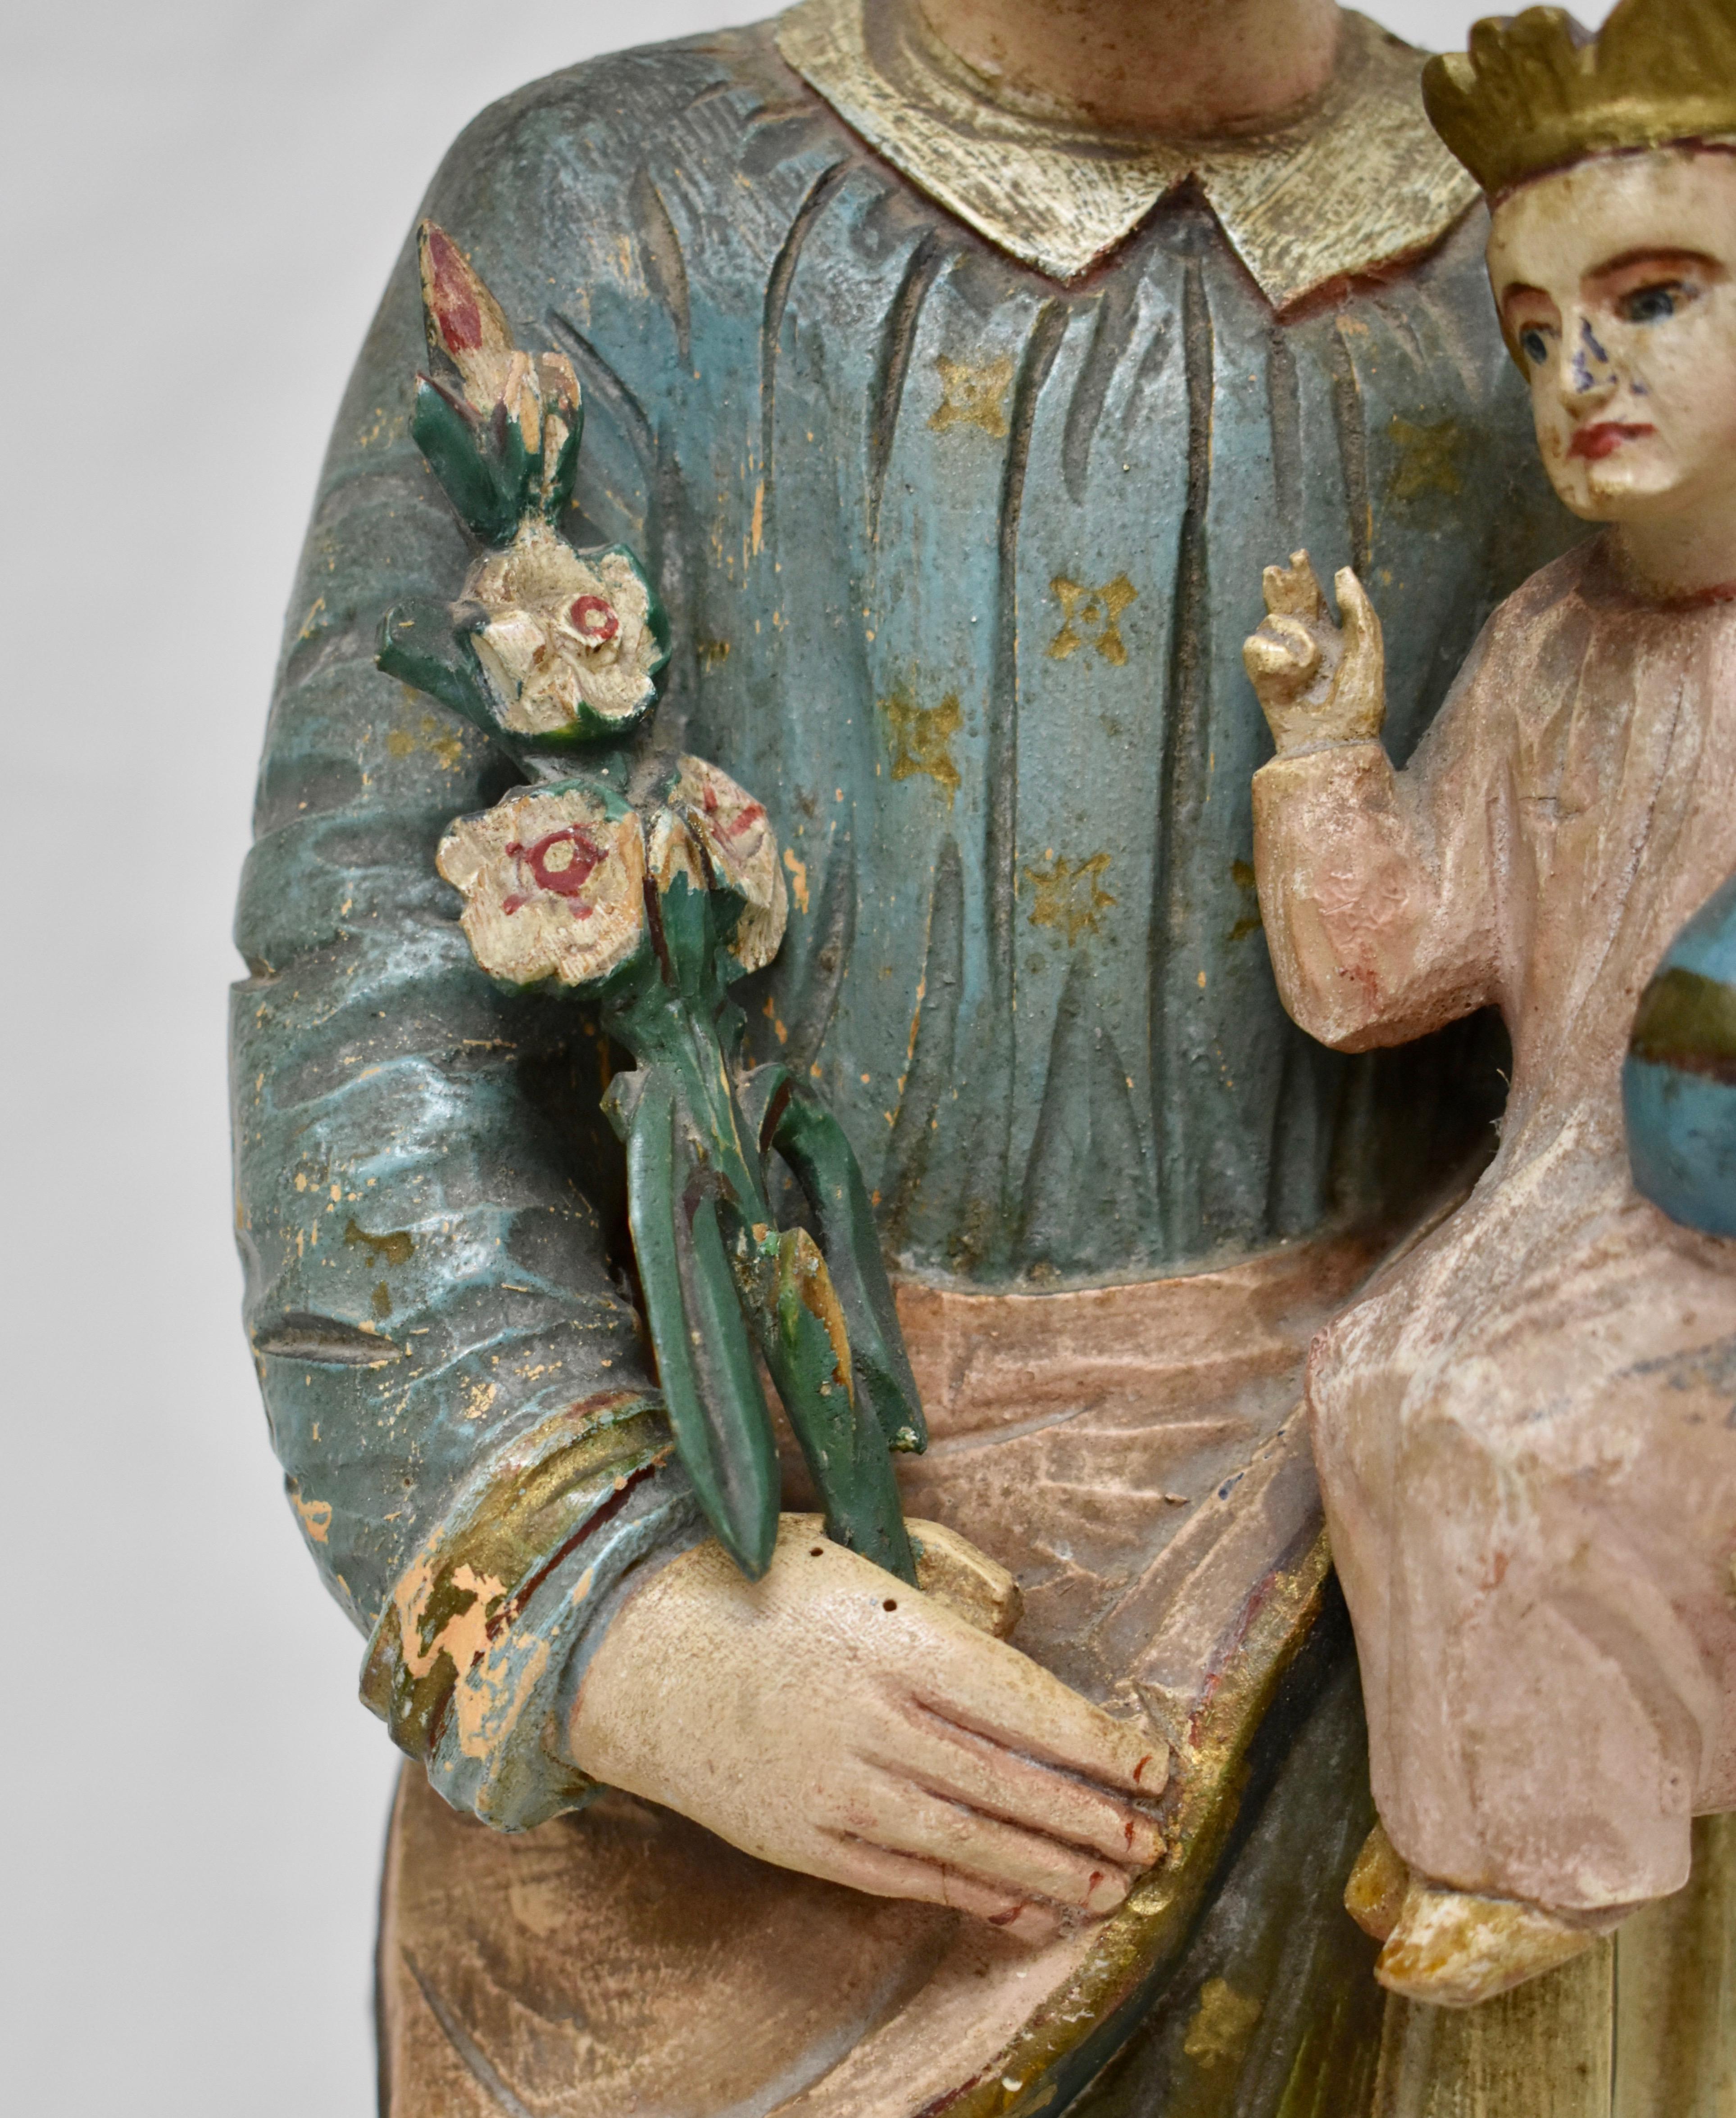 Hungarian Hand Carved Wooden Sculpture of Saint Joseph with Baby Jesus